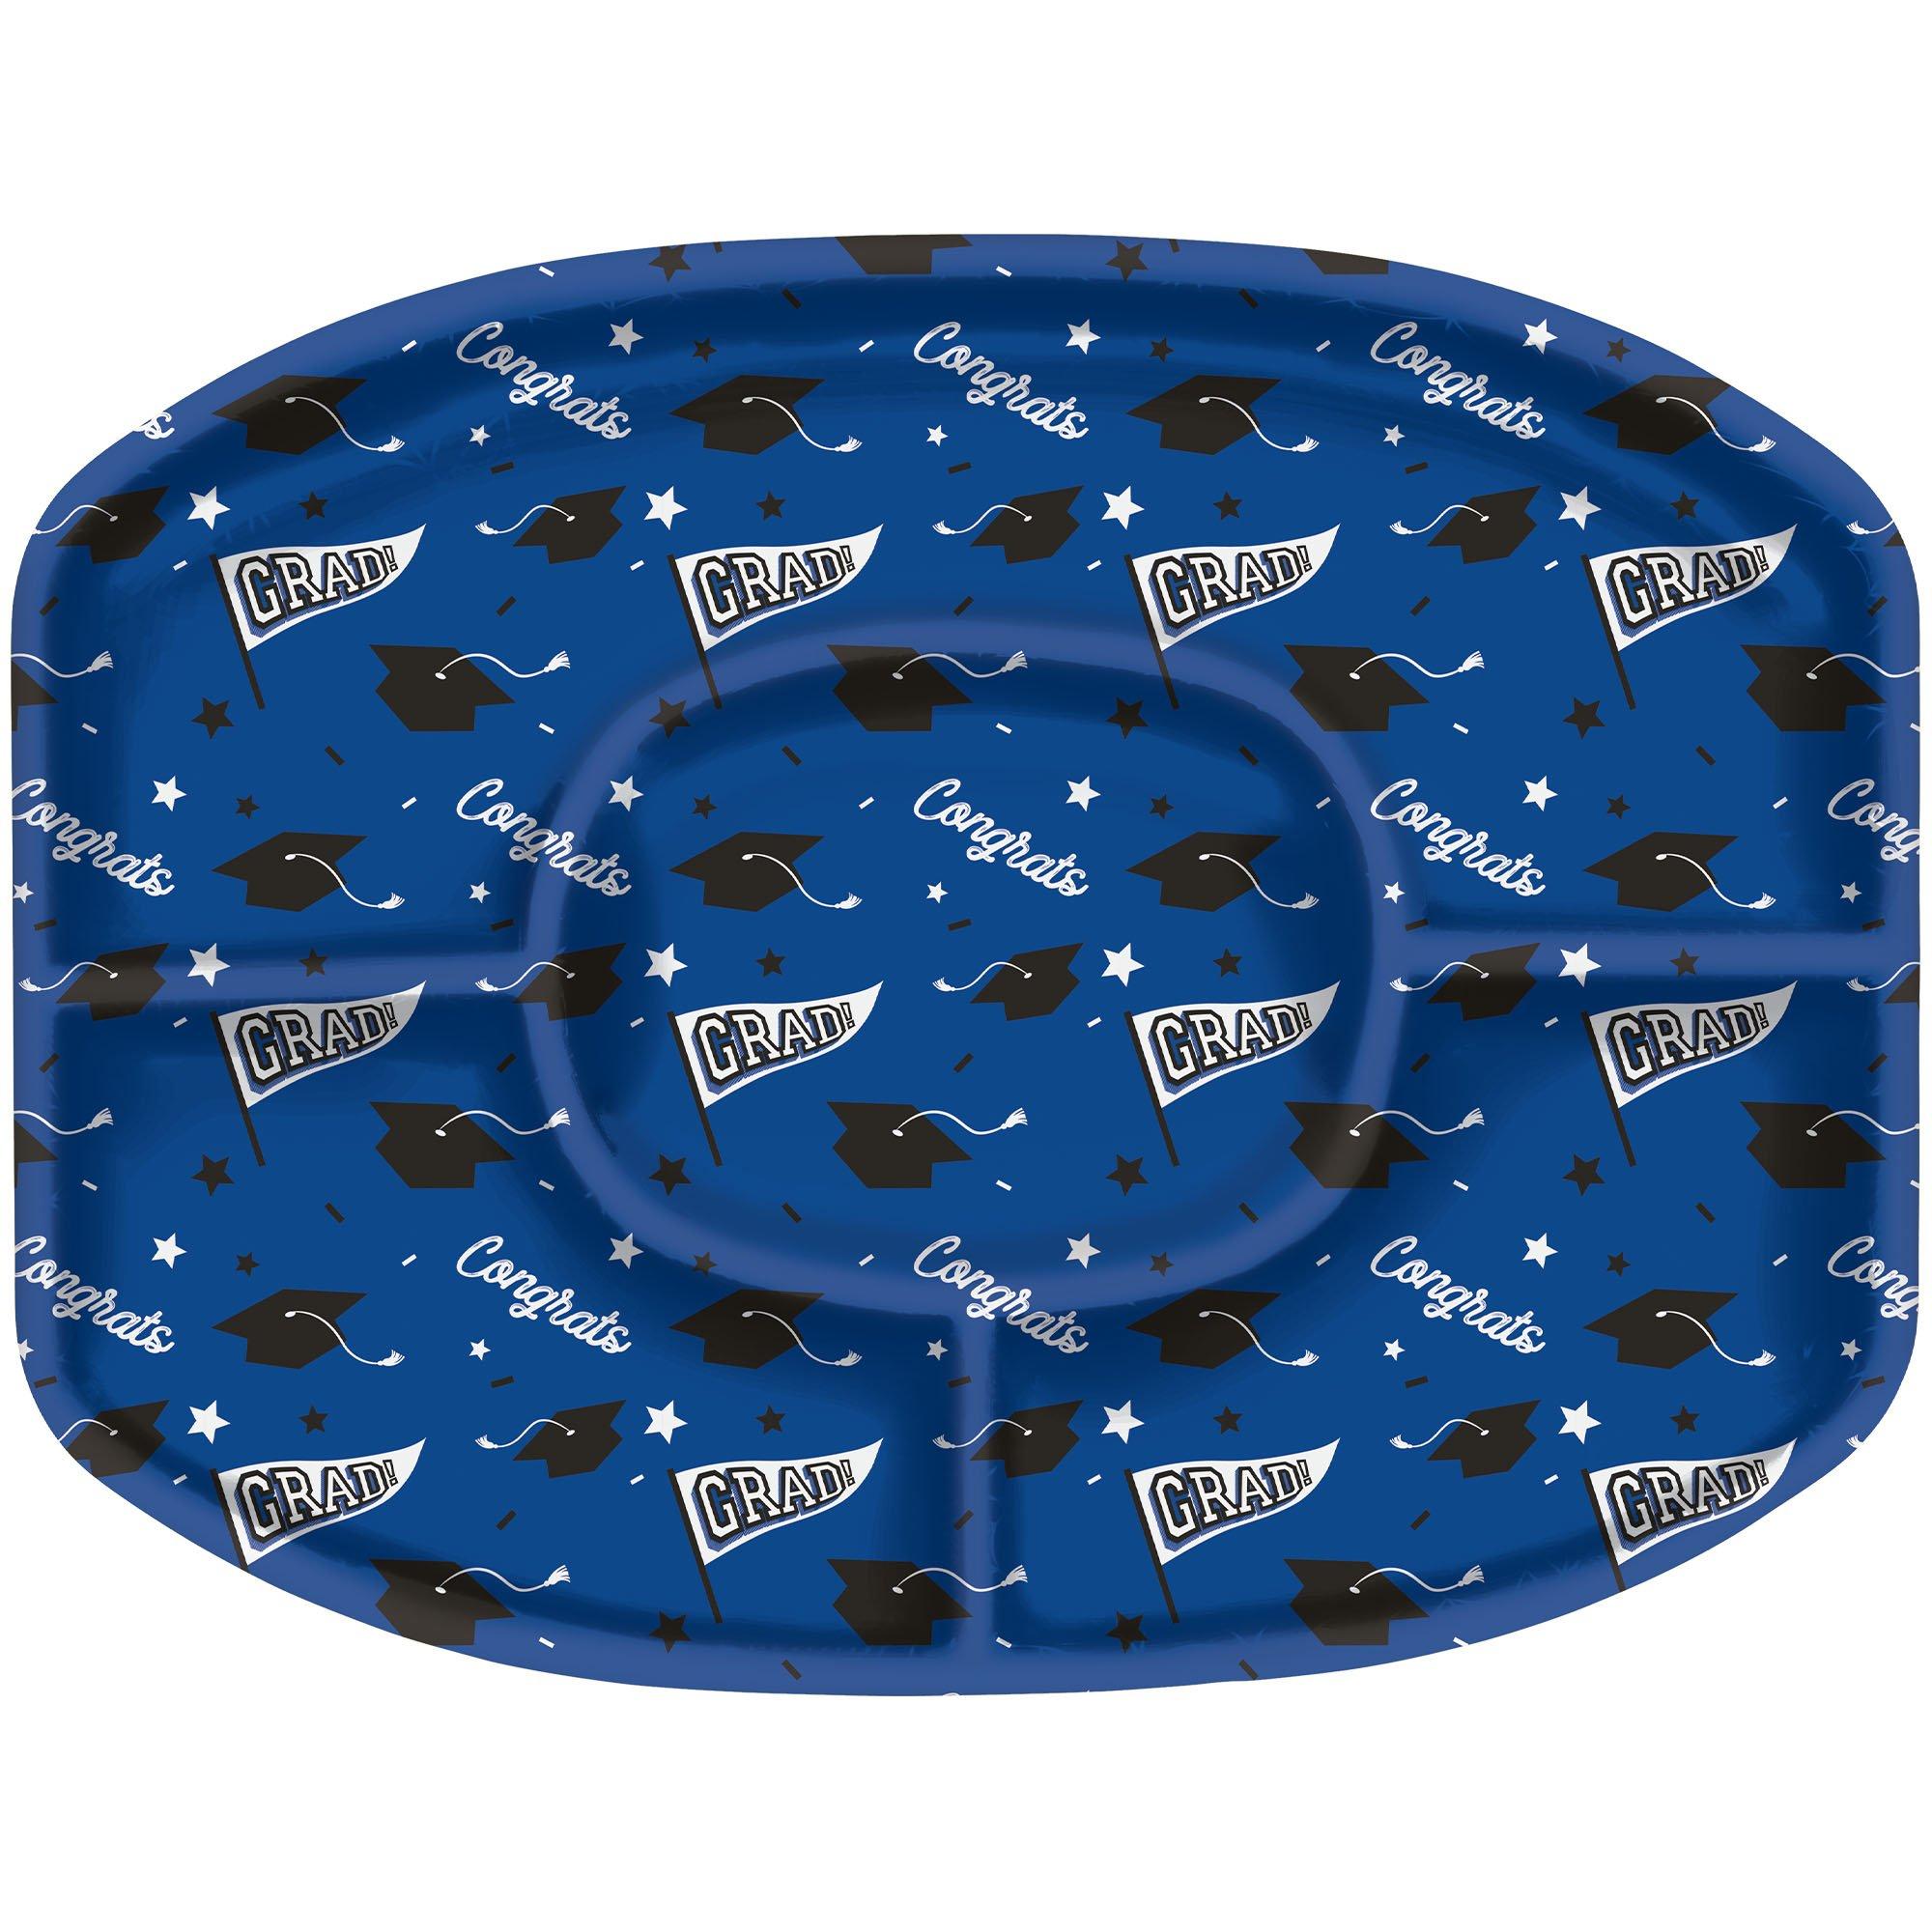 Congrats Grad Plastic Sectional Platter, 18.25in x 13.25in